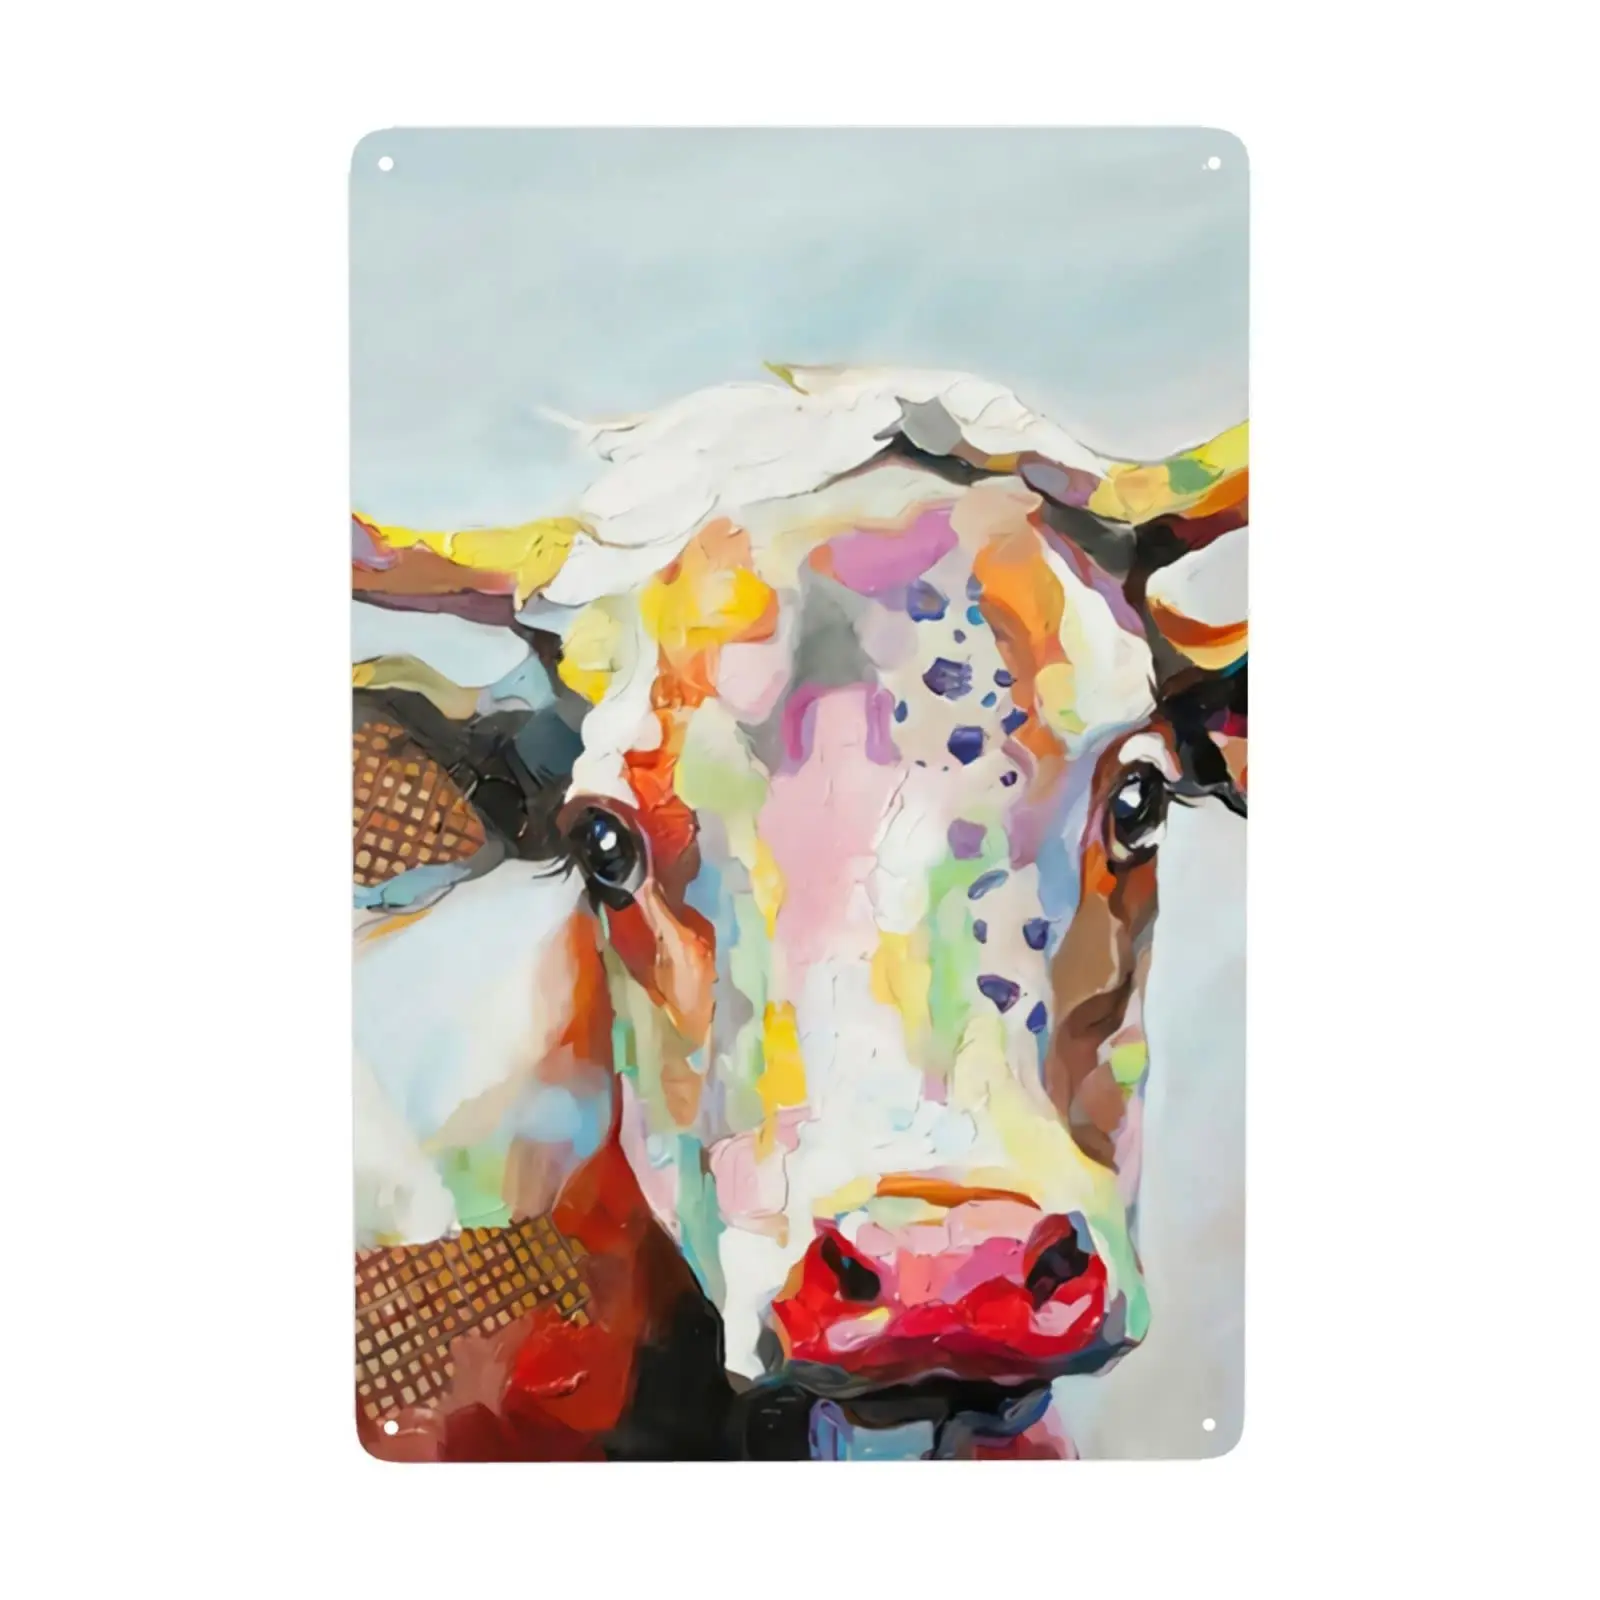 

Laquaud Tin Signs Cow 44 Art Painting Printed Cafe Hot Wall Pictures Fashion Home Decor For Bedroom,Bathroom Picture Printing,8x